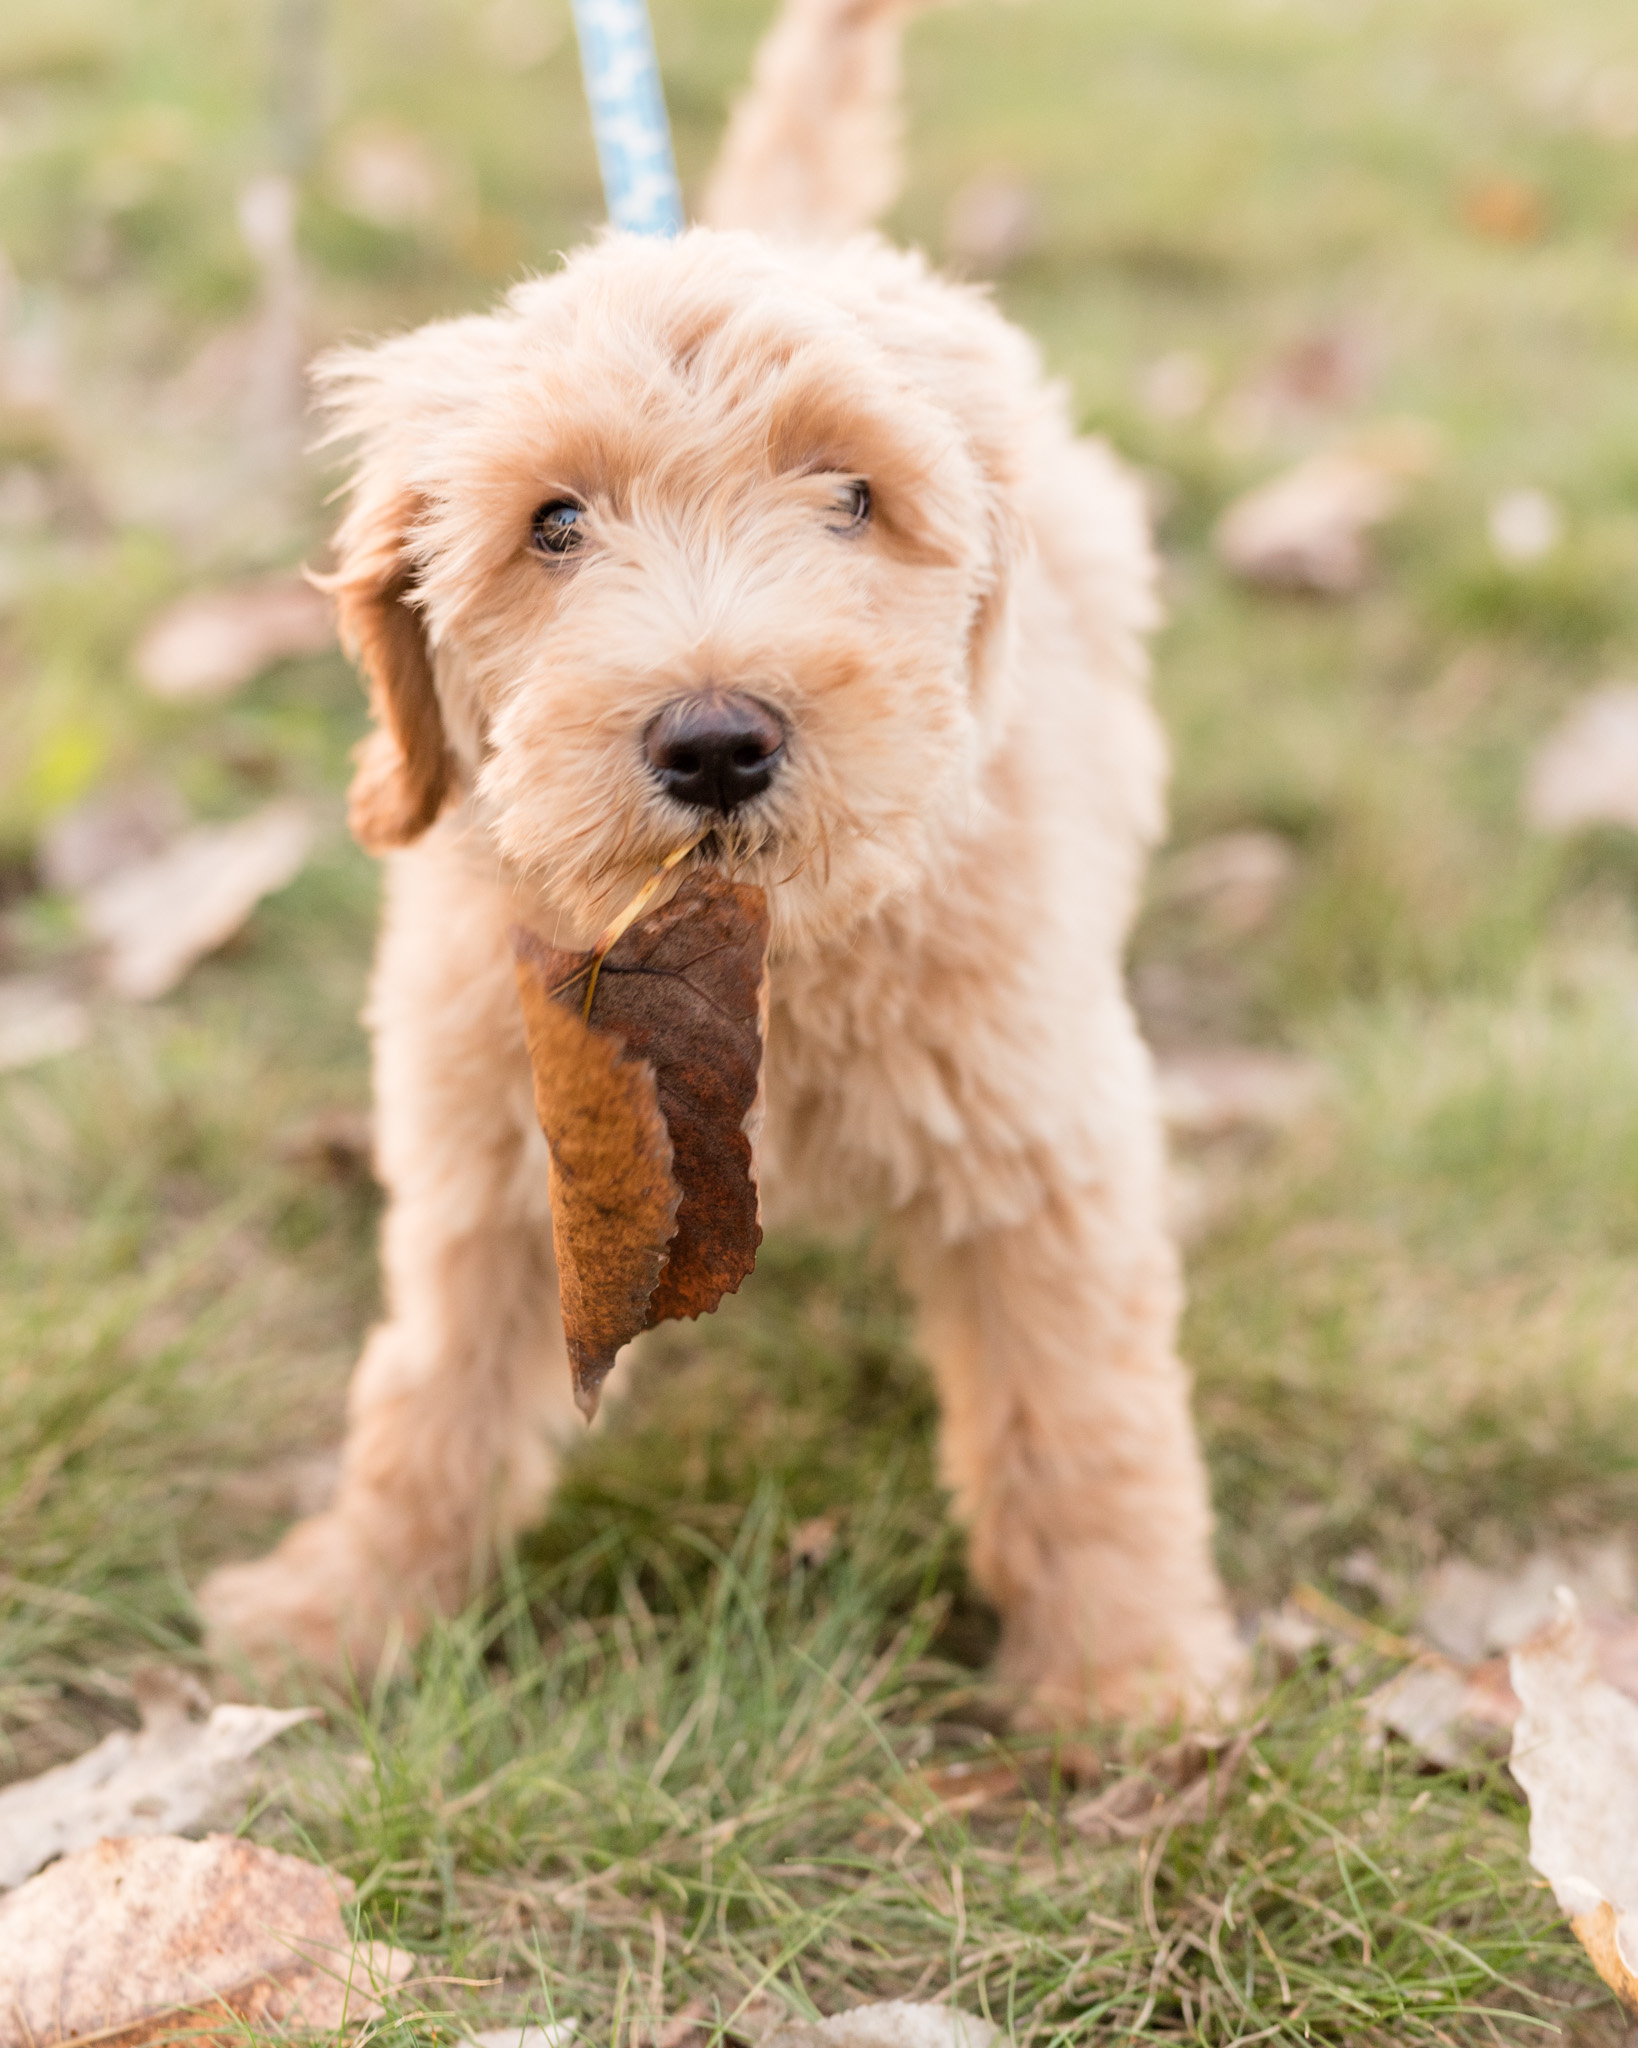 Goldendoodle puppy holds leaf in mouth.